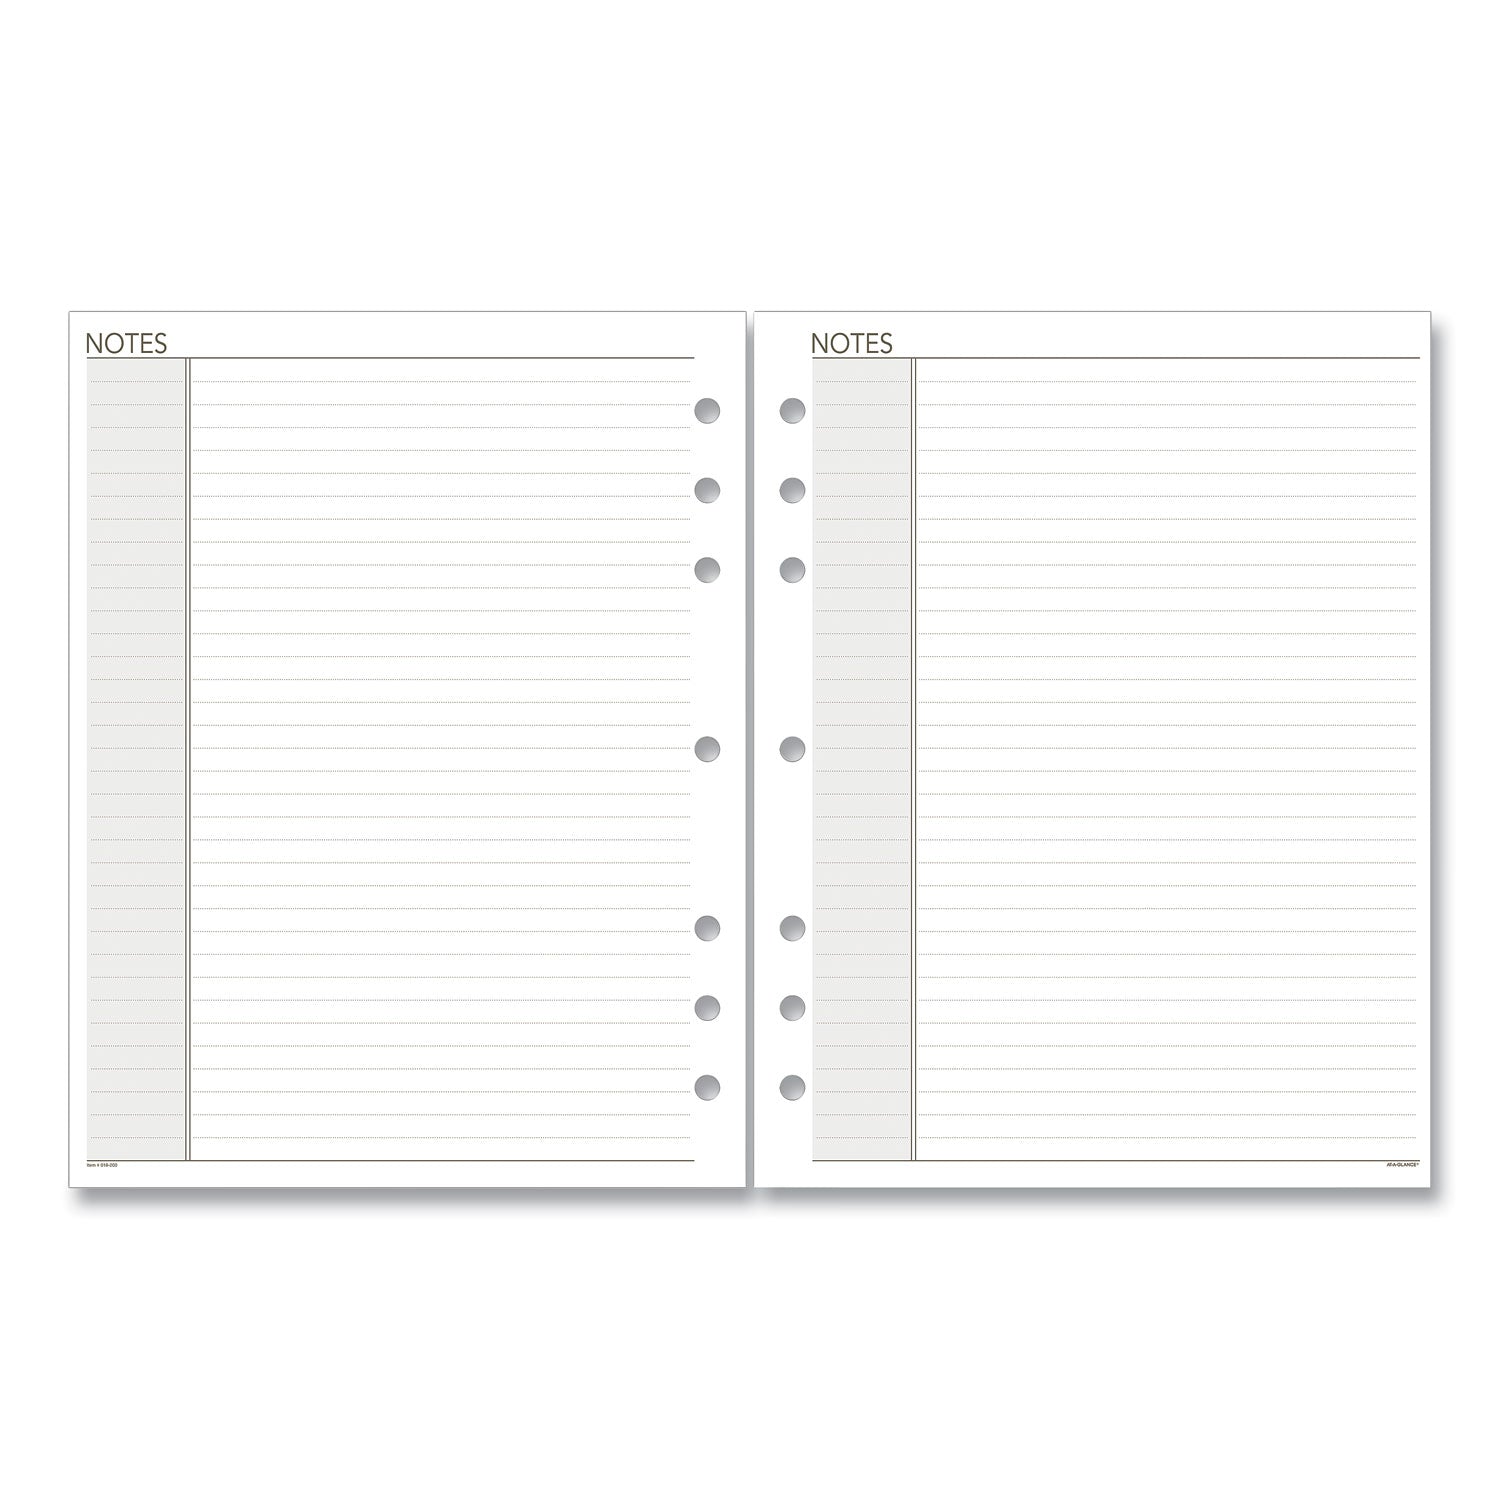 AT-A-GLANCE Lined Notes Pages for Planners/Organizers, 8.5 x 5.5, White Sheets, Undated Flipcost